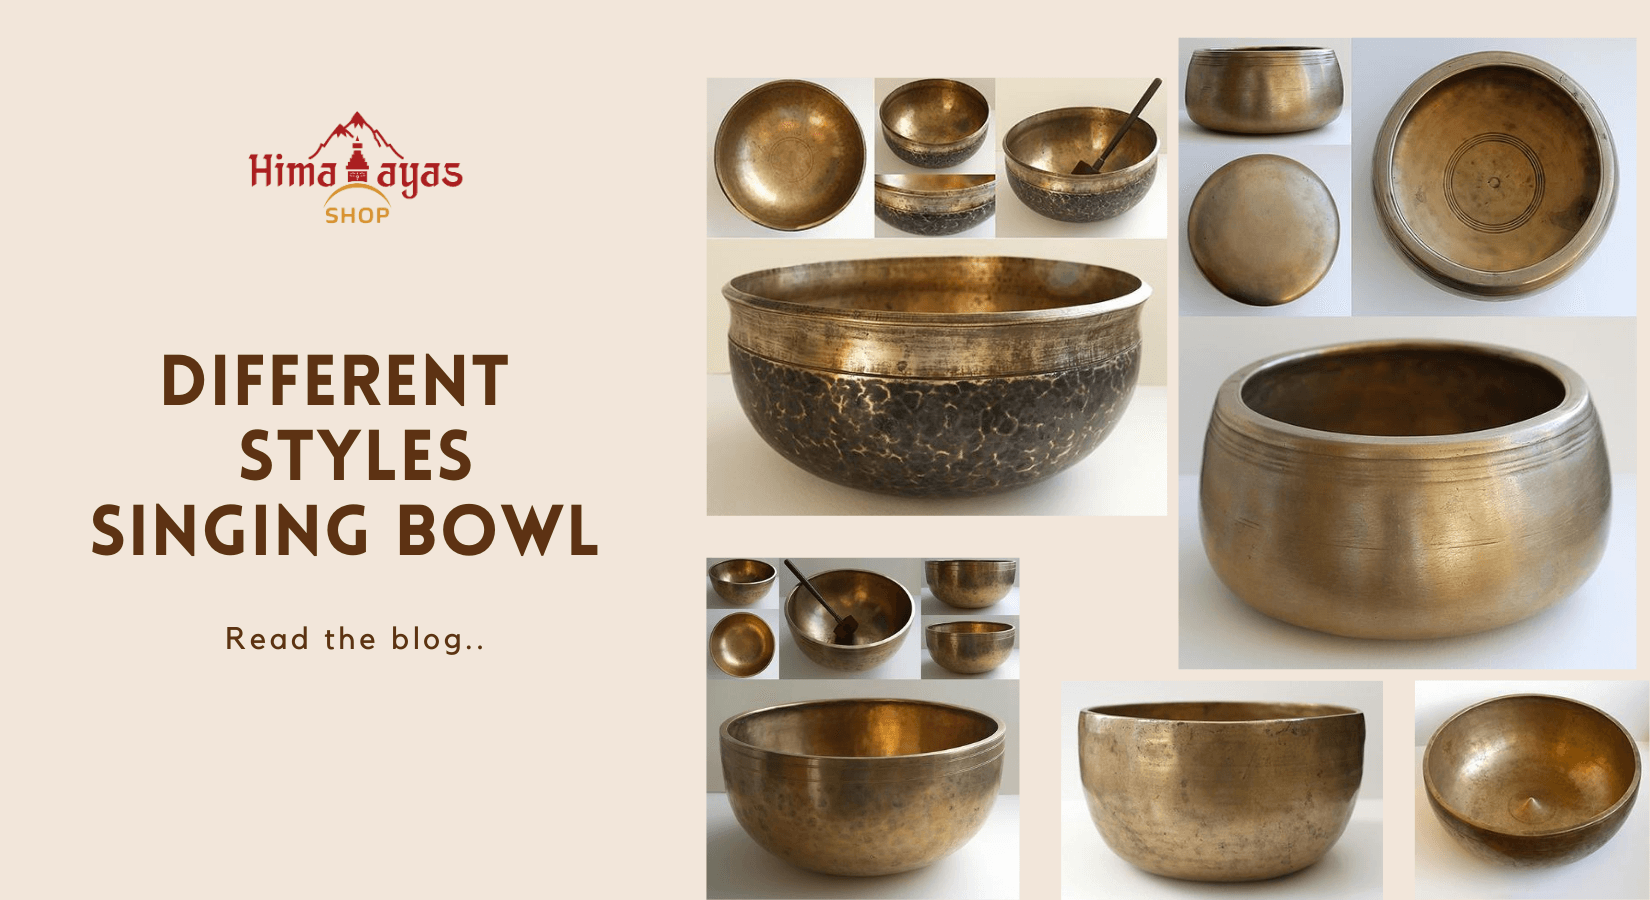 Different Styles of singing bowls